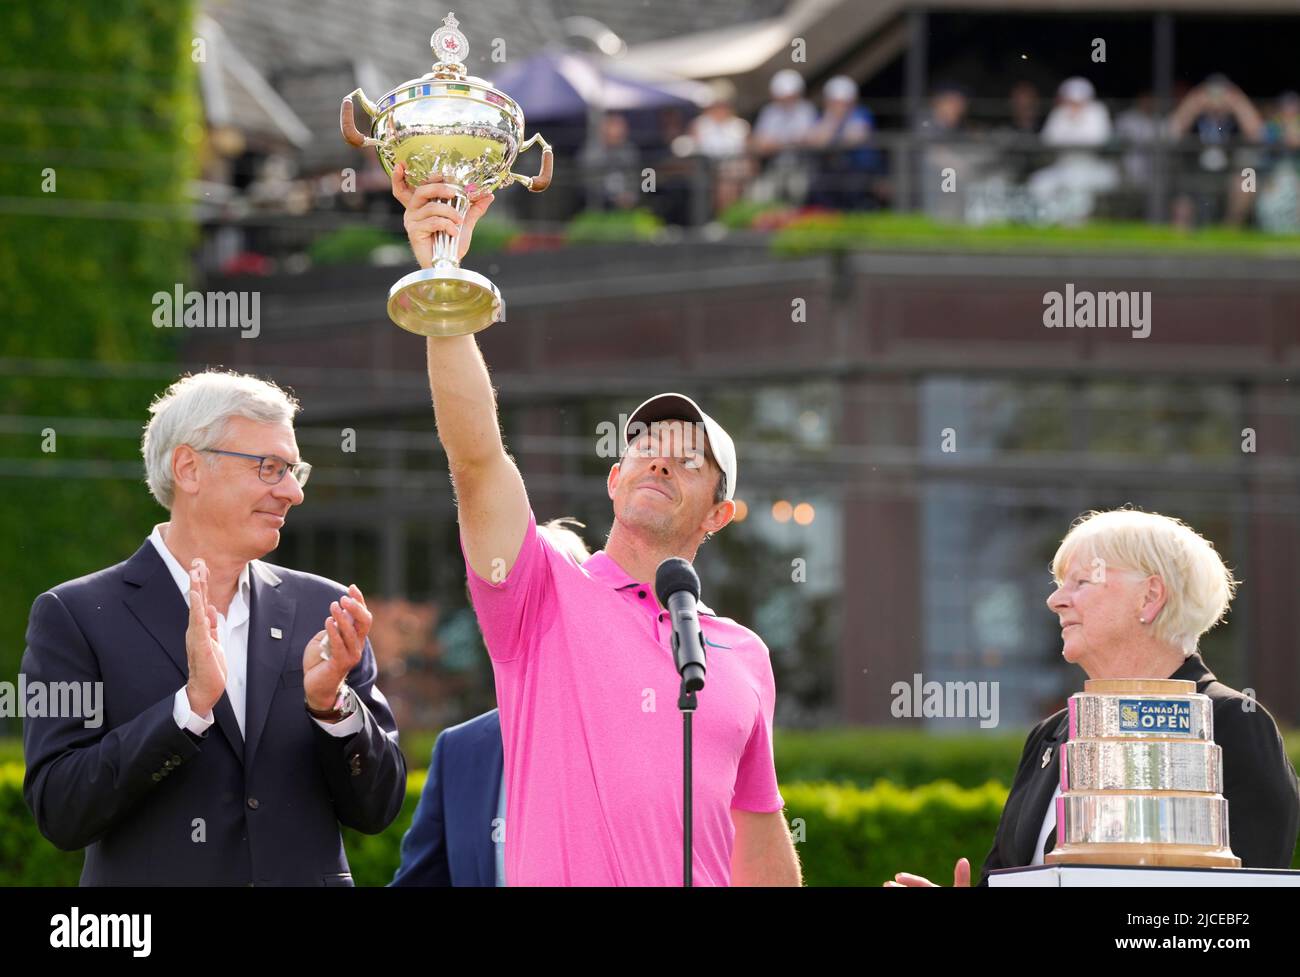 Rbc canadian open trophy hires stock photography and images Alamy